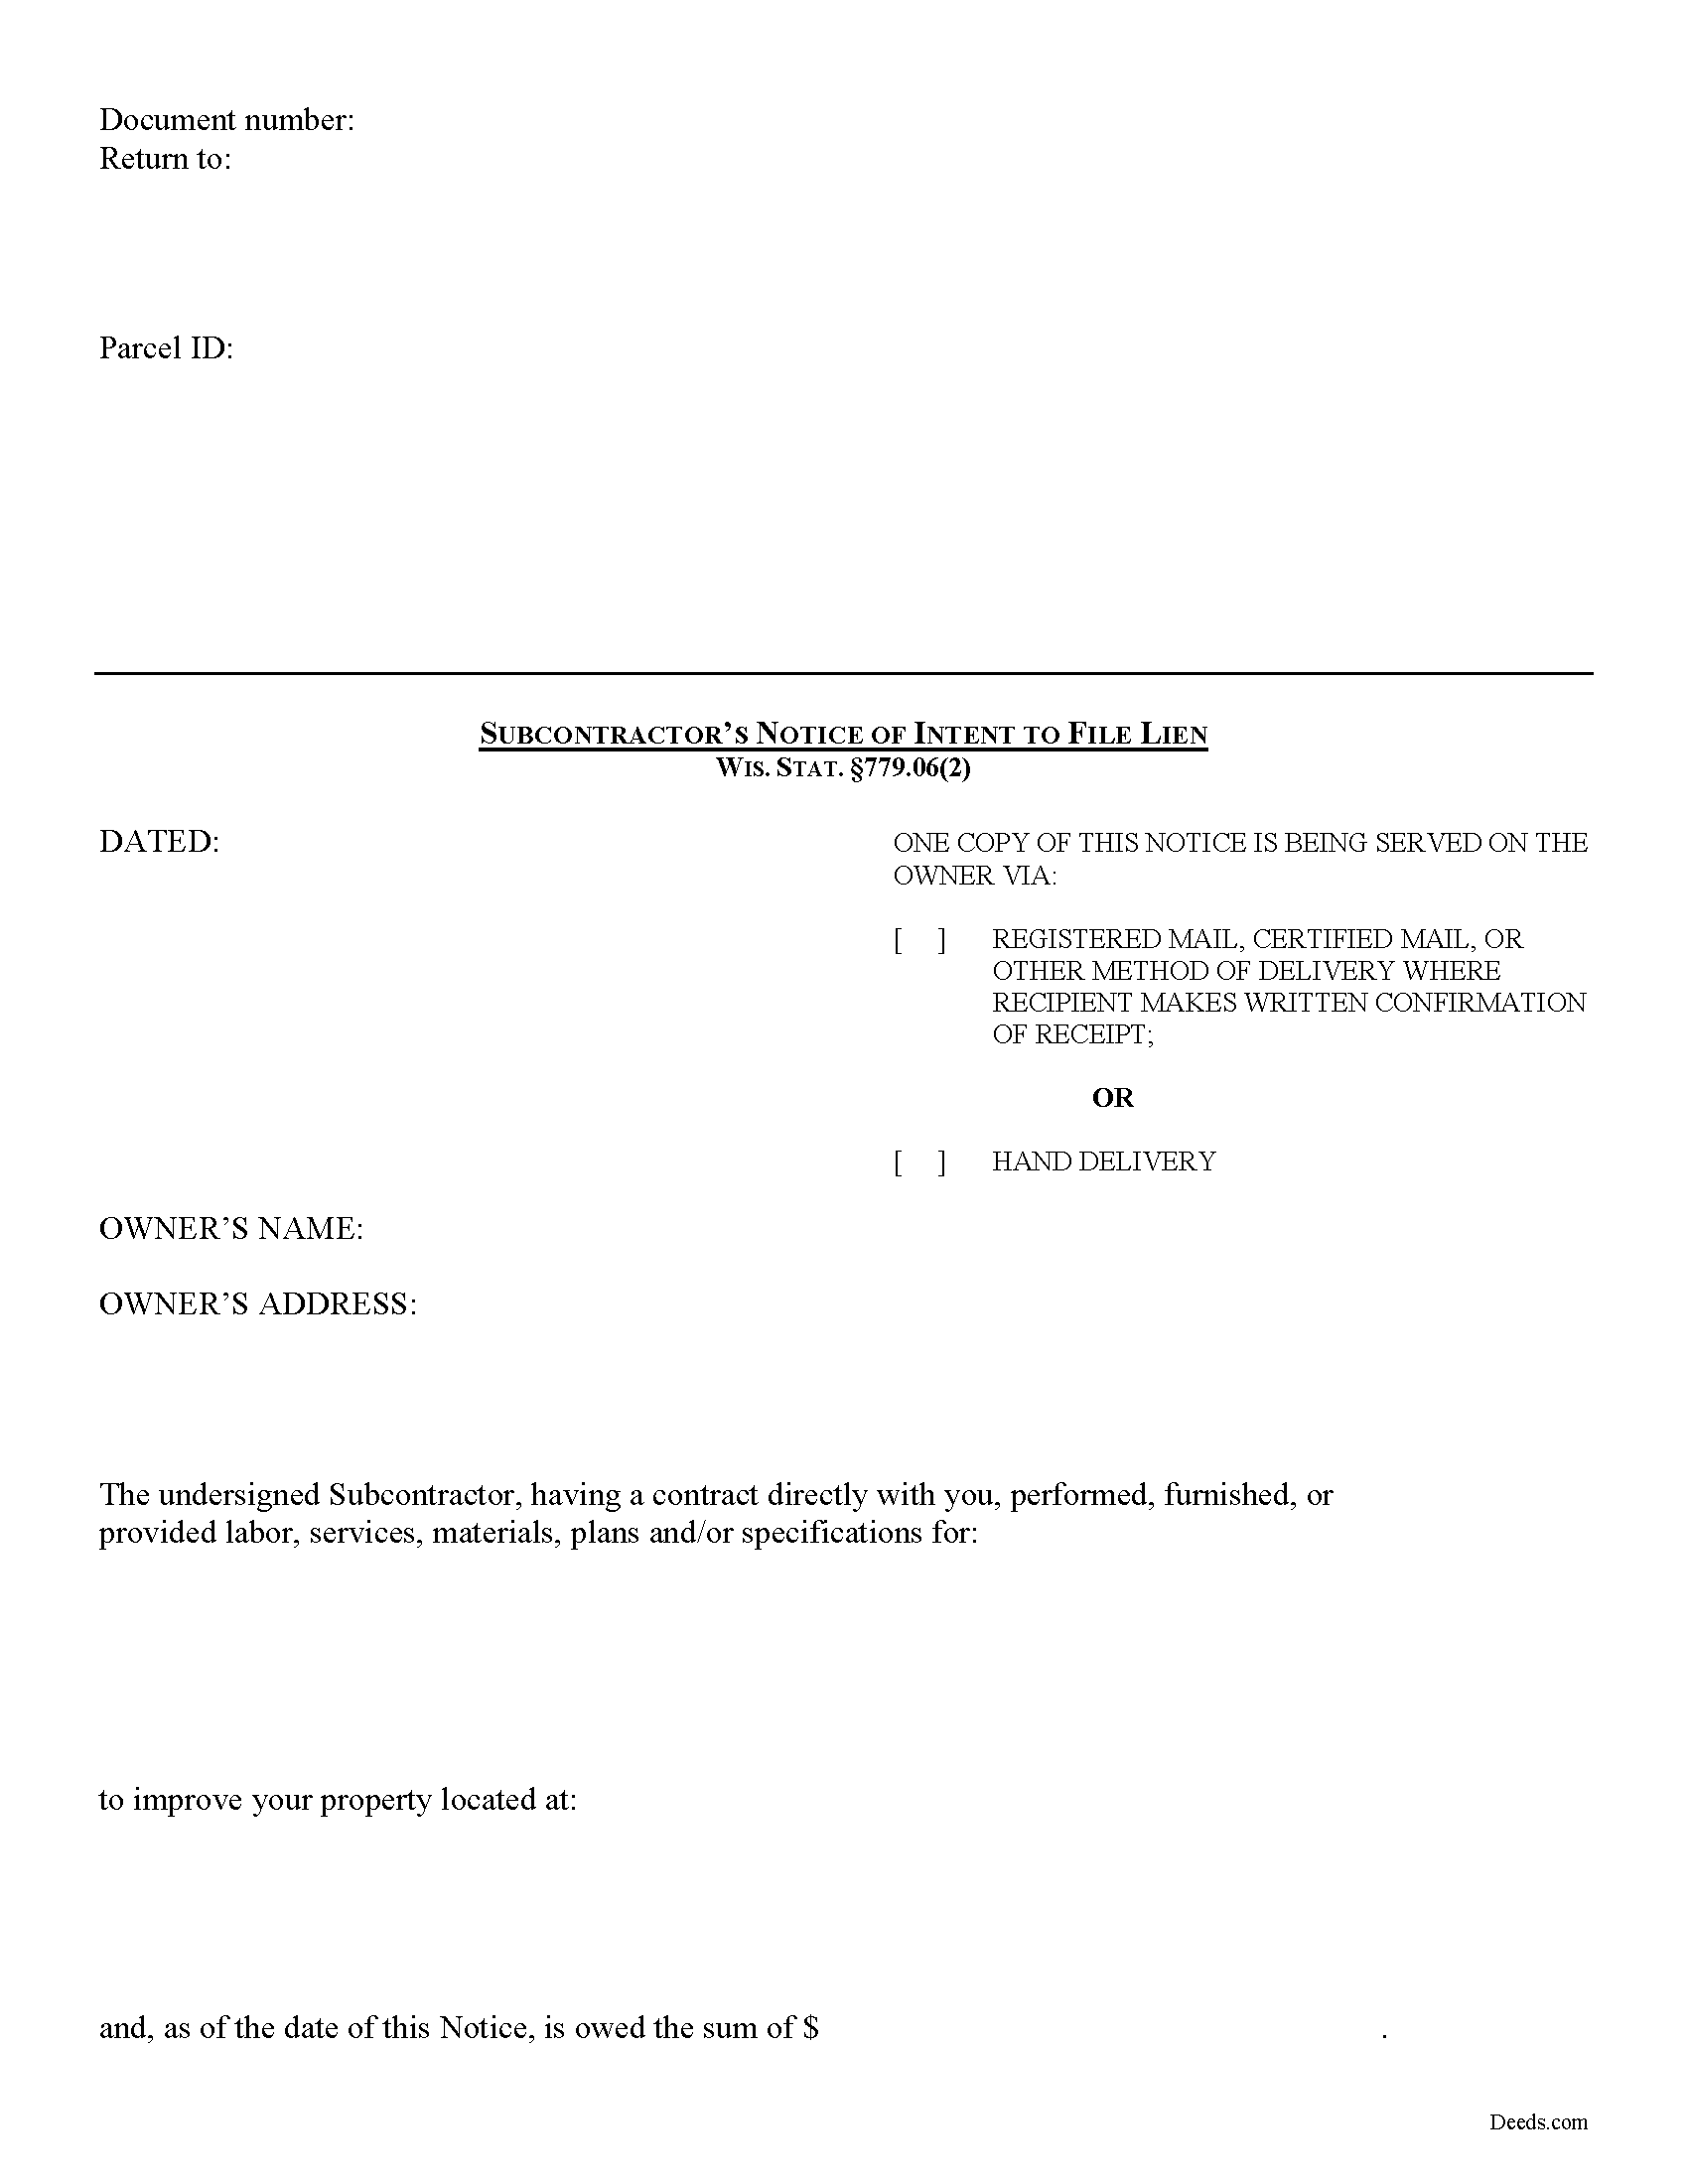 Subcontractor Notice of Intent to File Lien Form